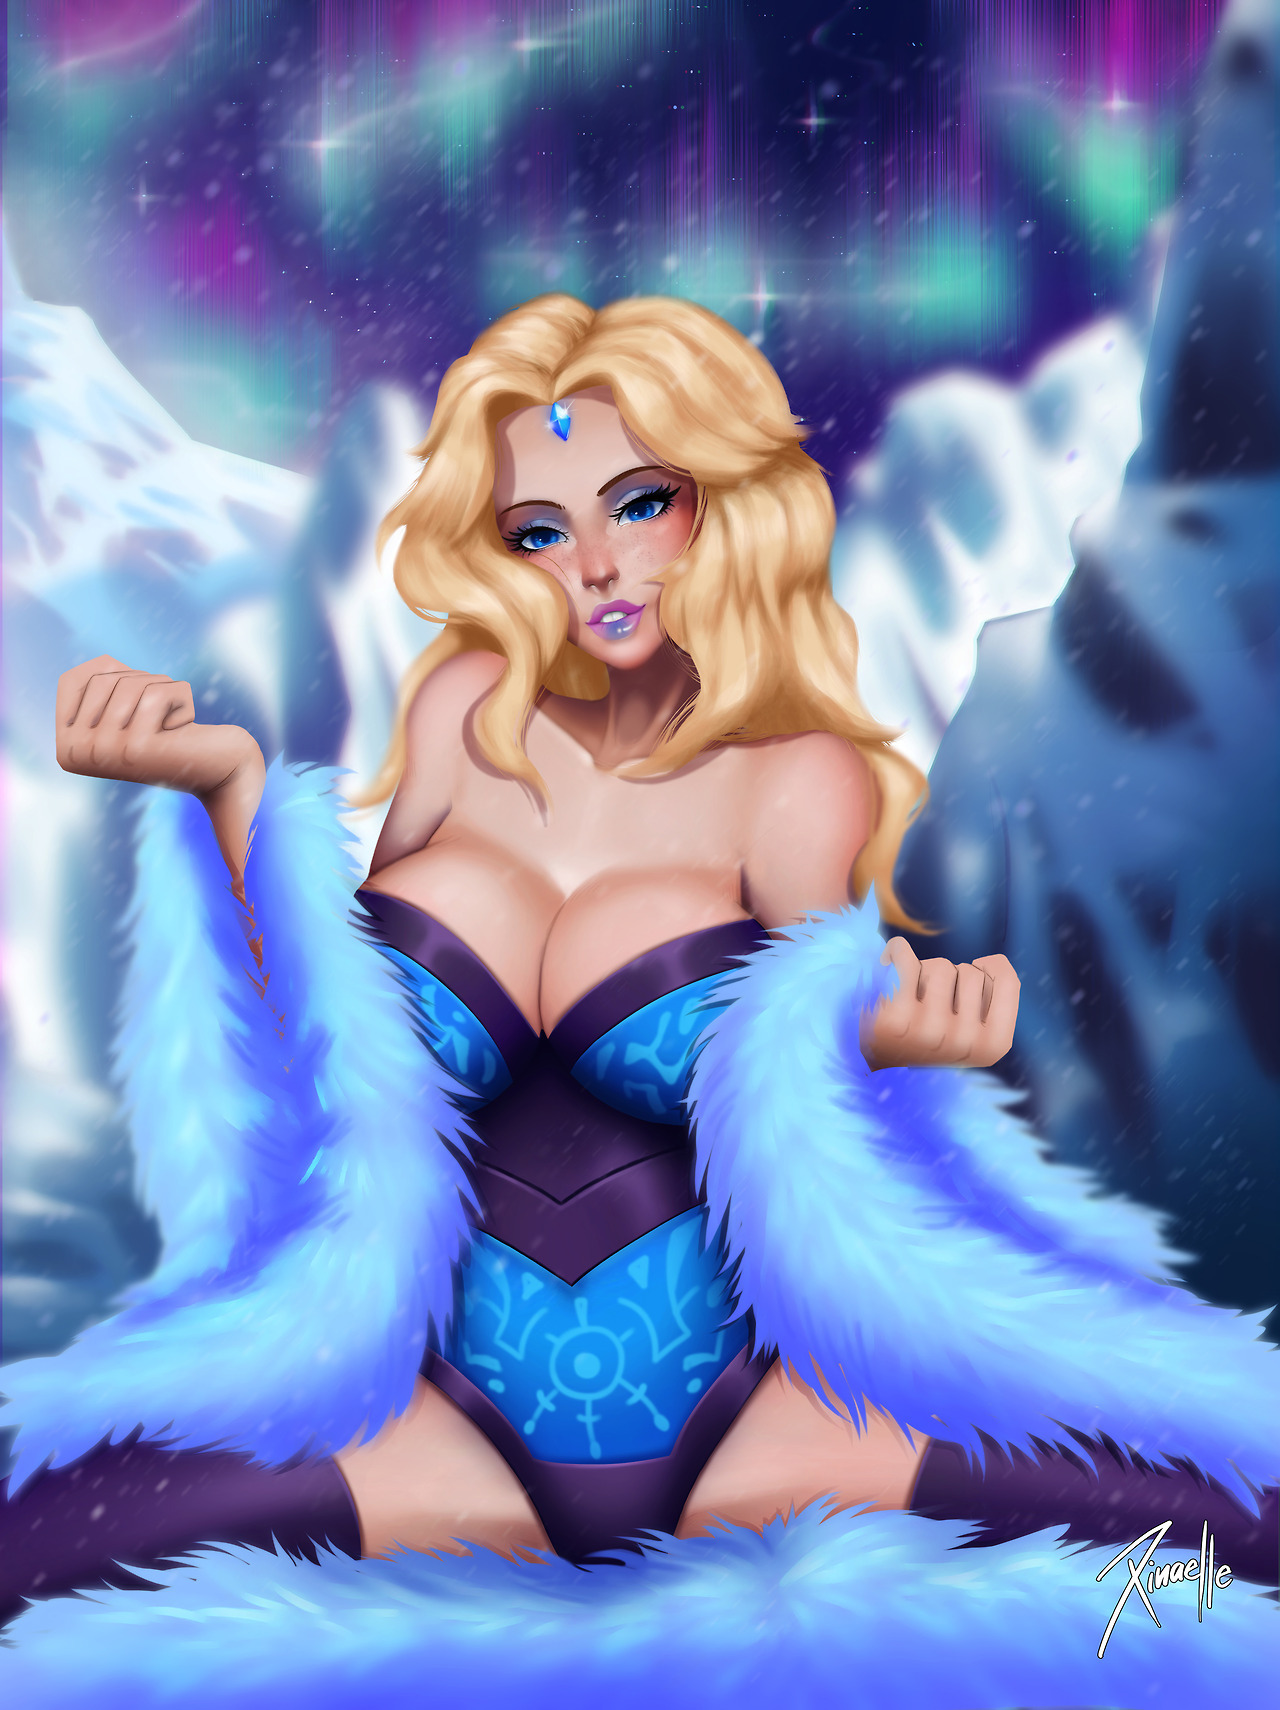 xinaelle-sfw:  Crystal Maiden Commission for Patron  My Patreon